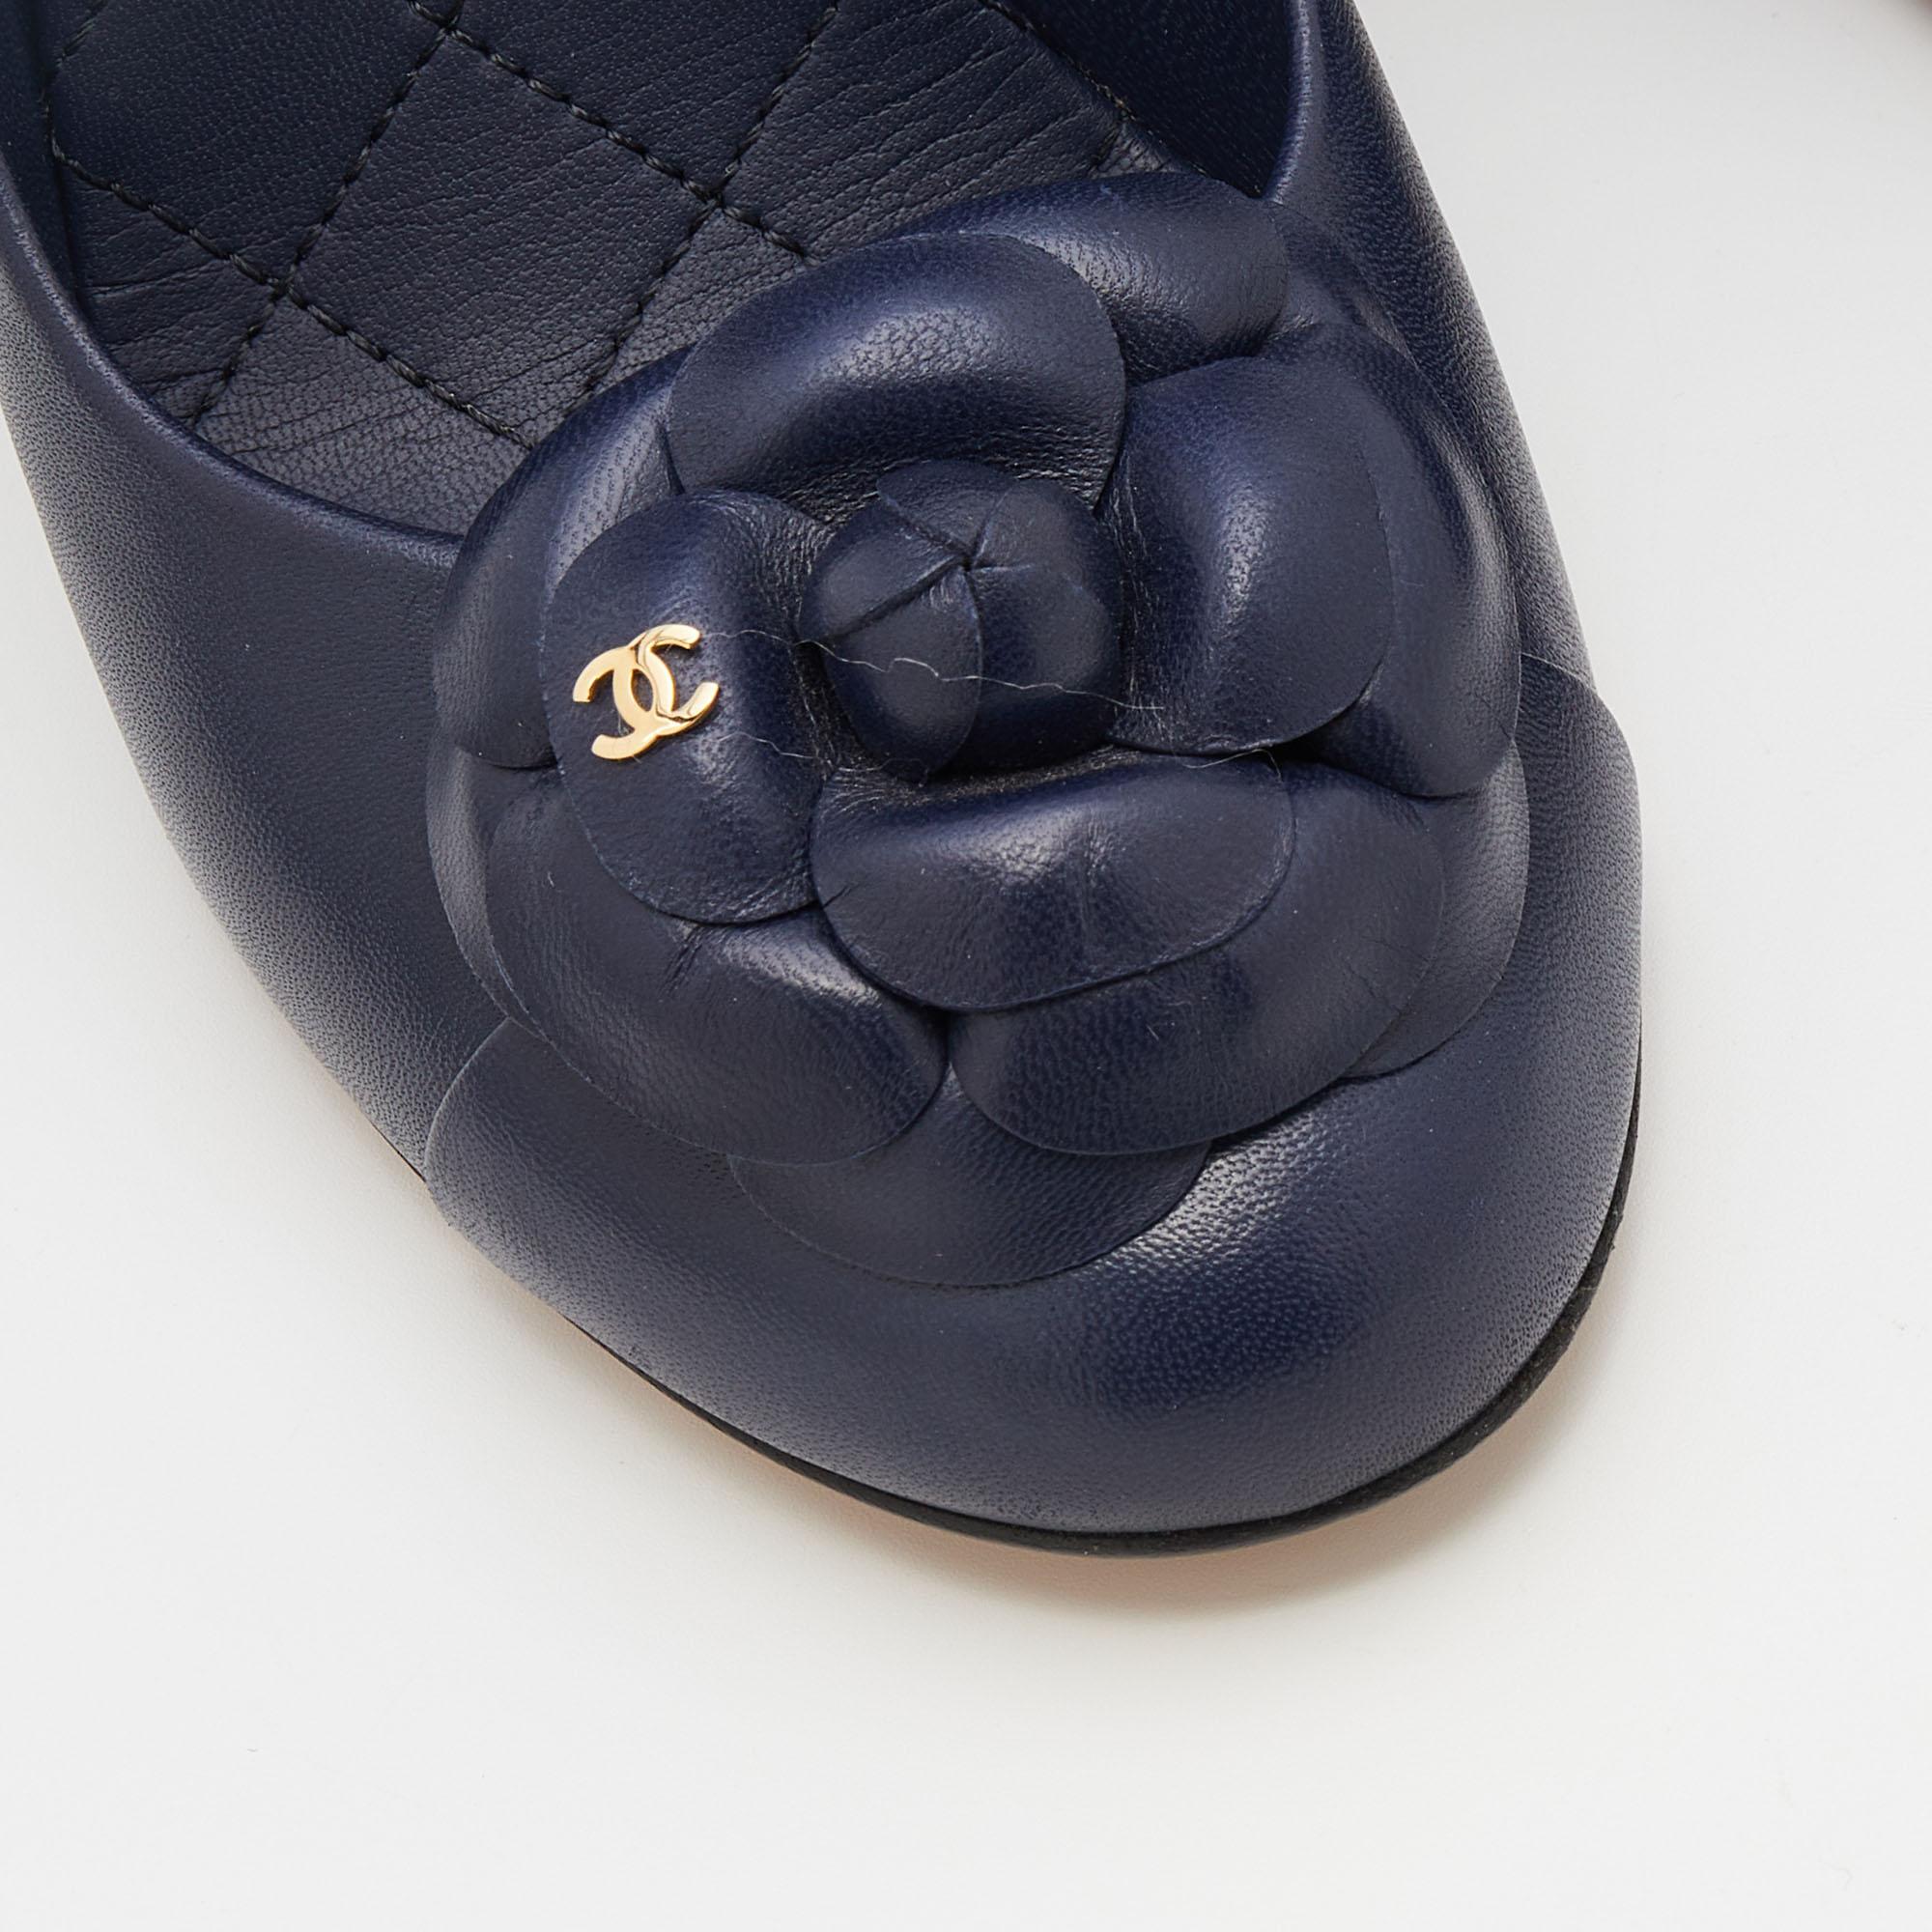 Chanel Navy Blue Leather Camellia Block Heel Pumps Size 39 1